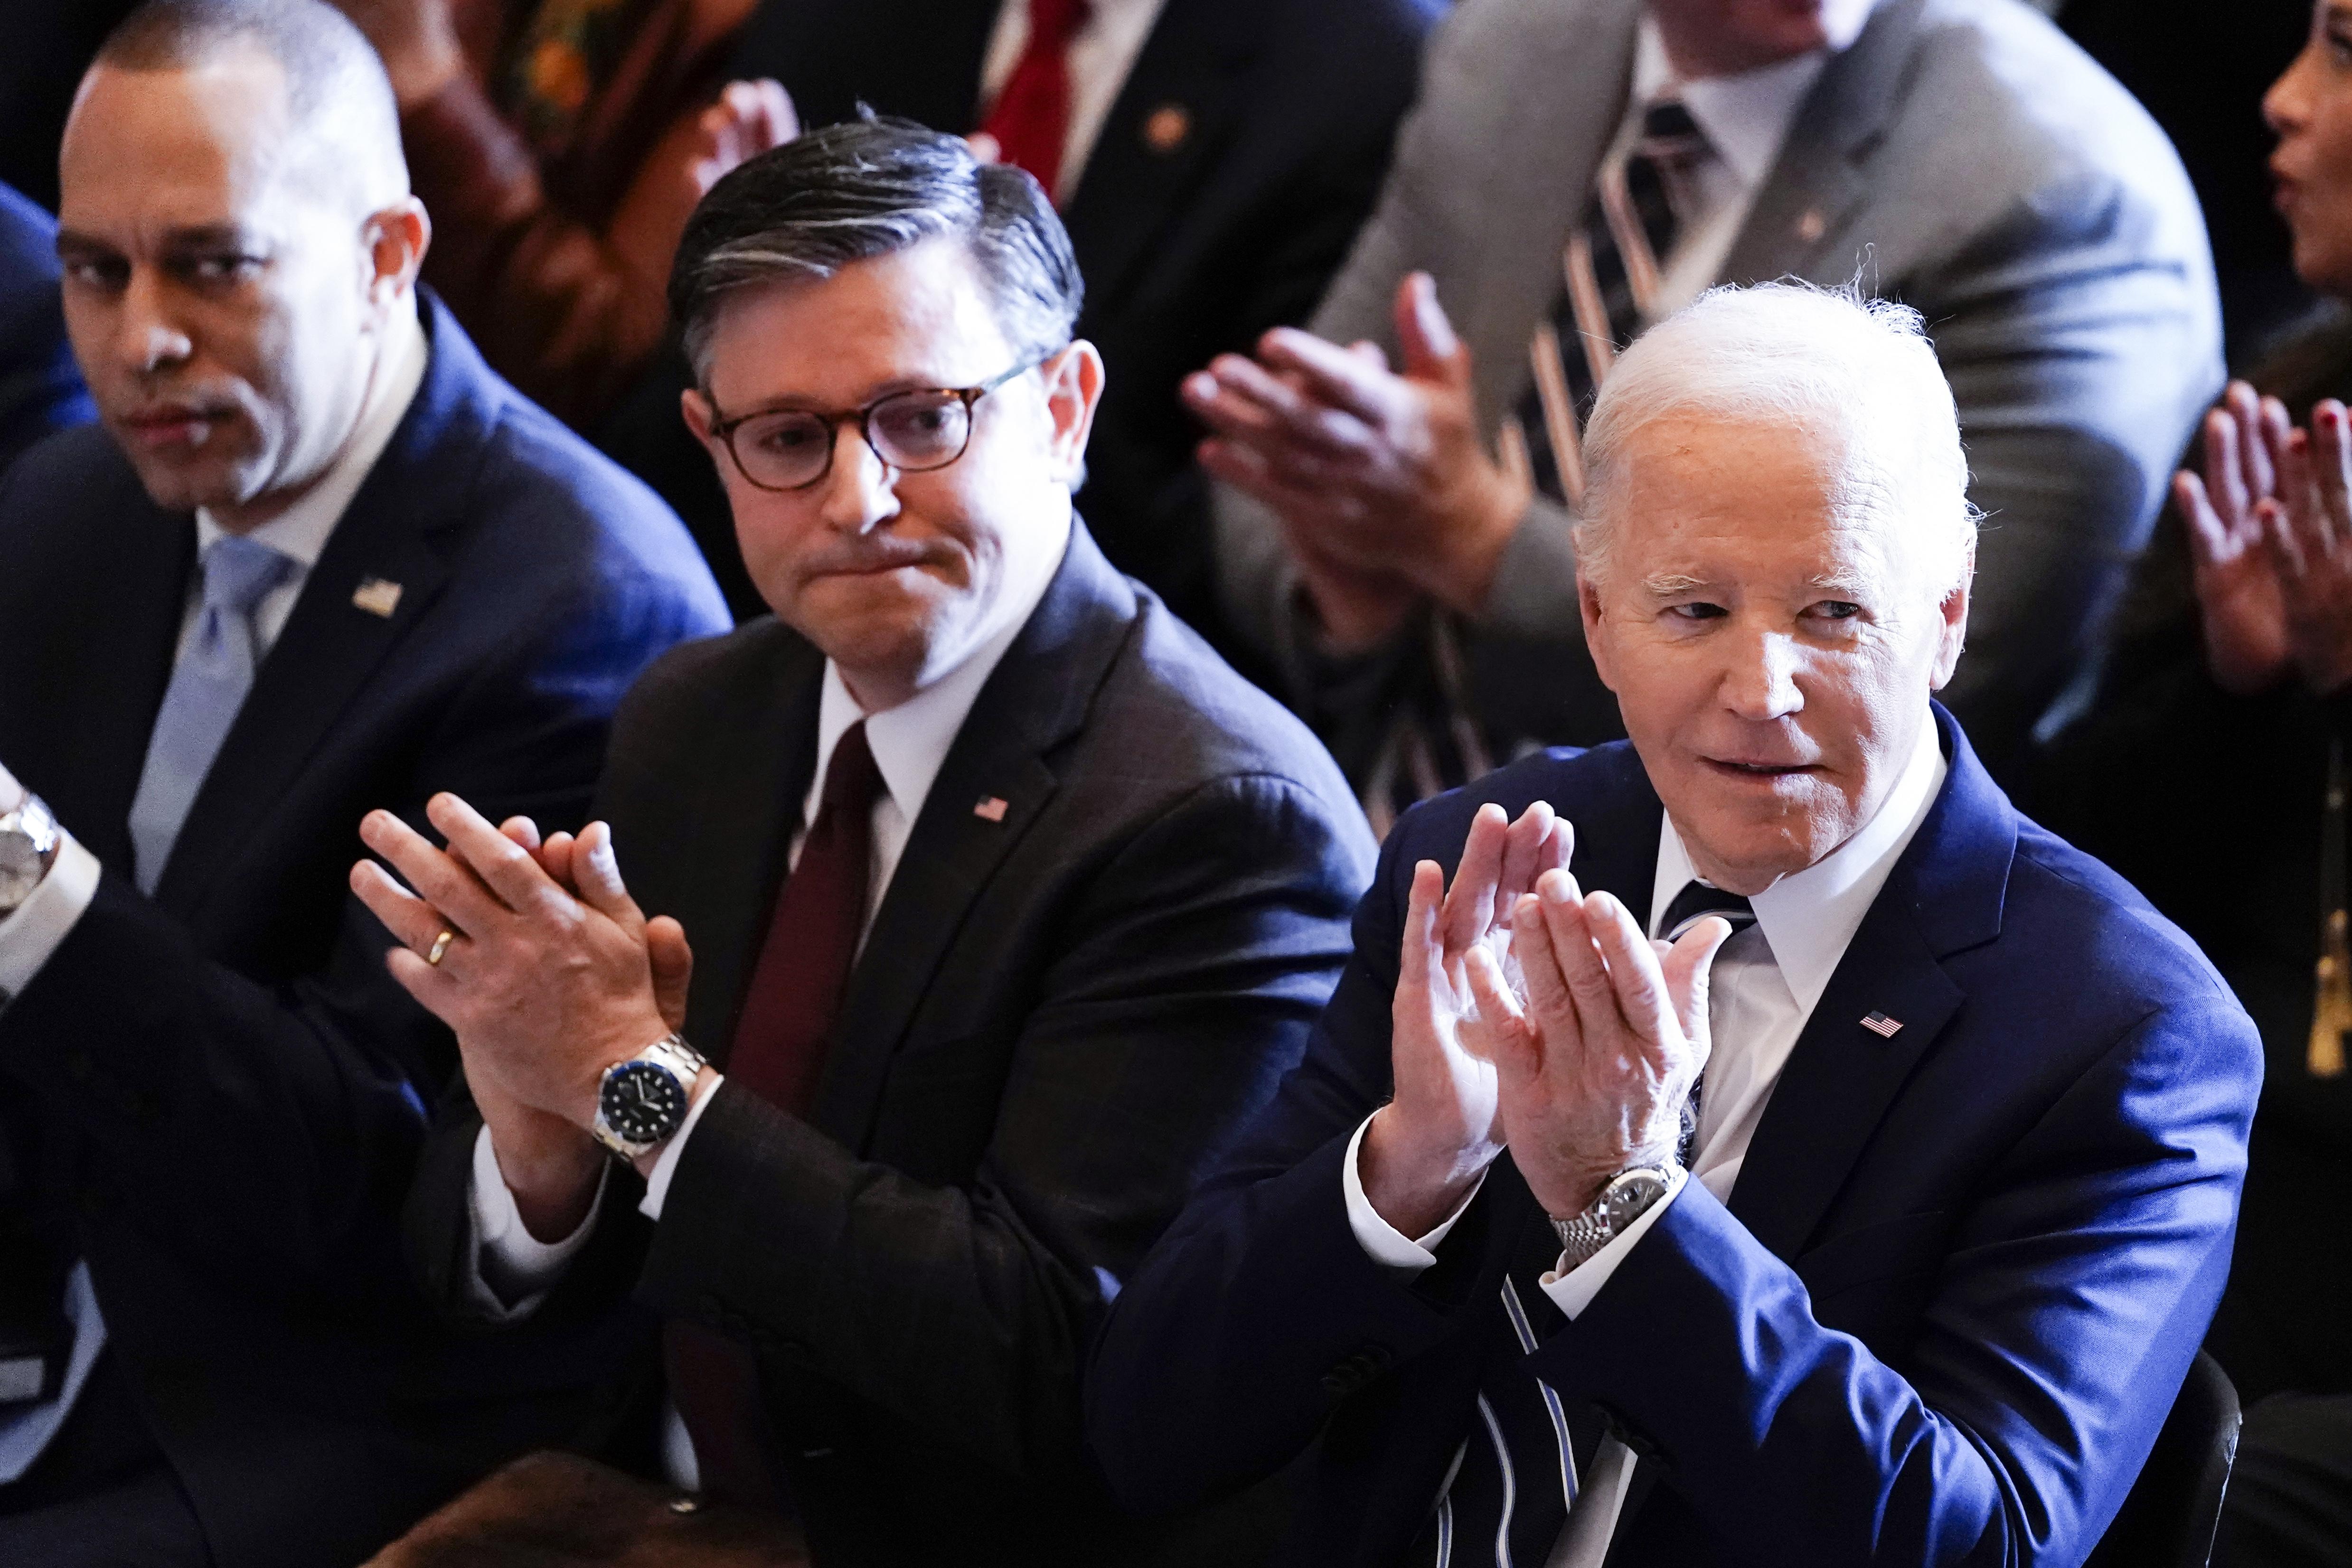 Biden will celebrate UAW endorsement in Detroit, where Arab American anger  is boiling over Gaza - Washington Times